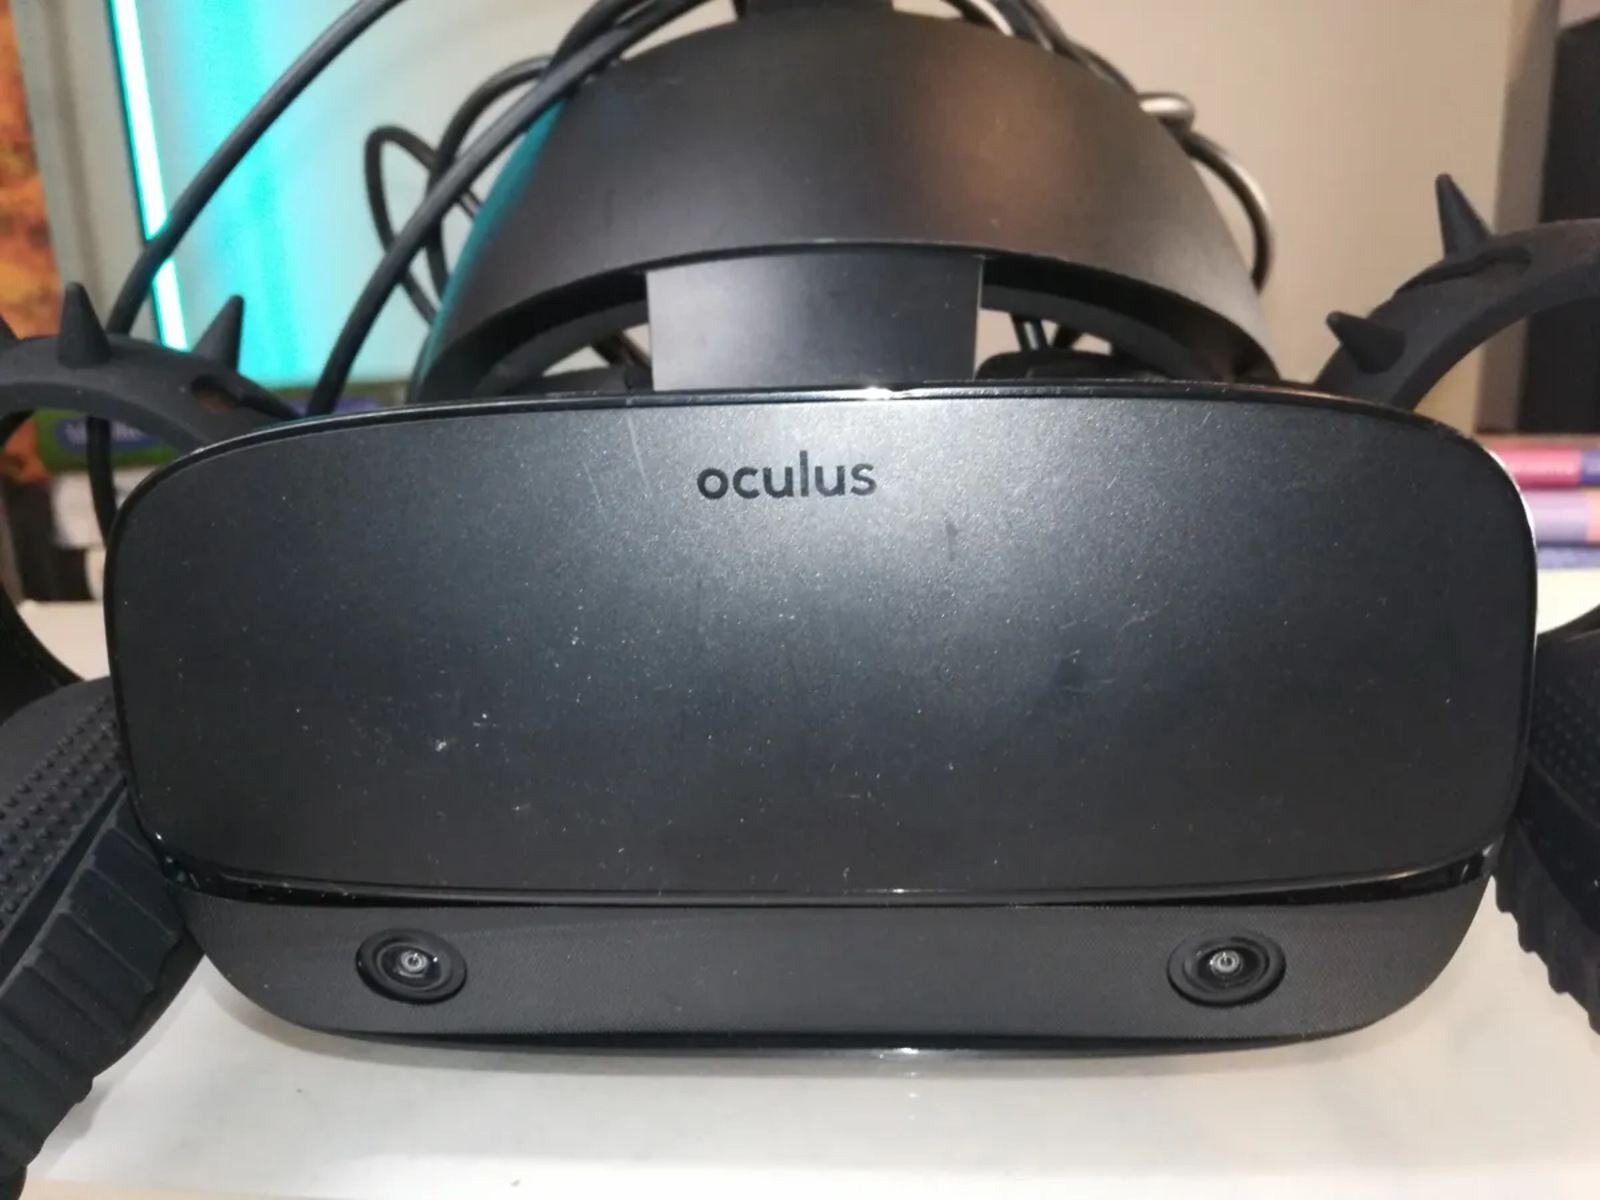 How To Set Up Oculus Rift S PC-Powered VR Gaming Headset